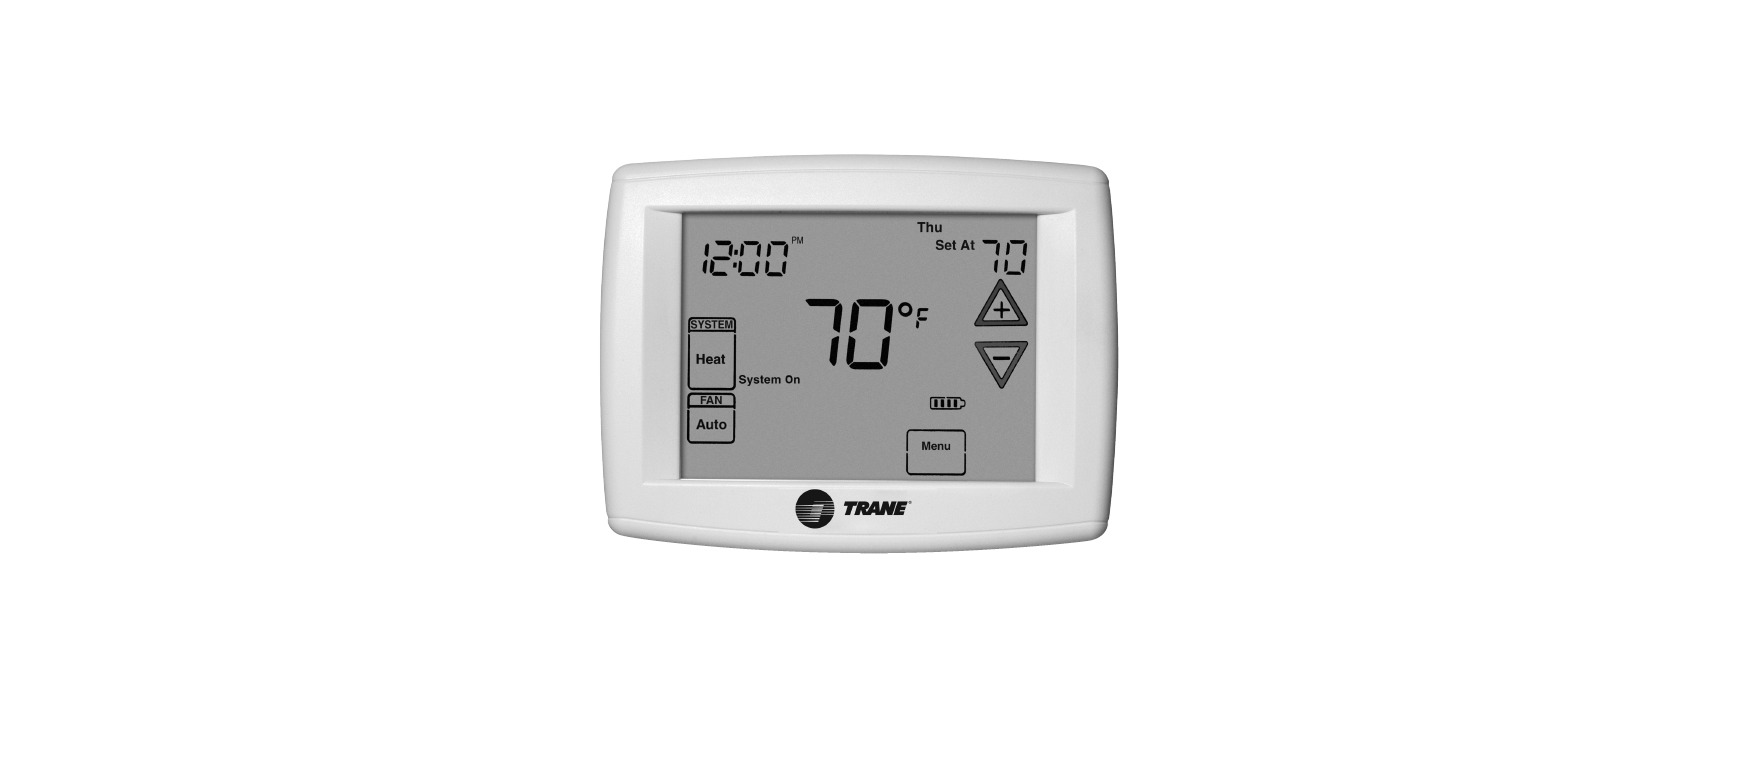 How To Use Trane Thermostat